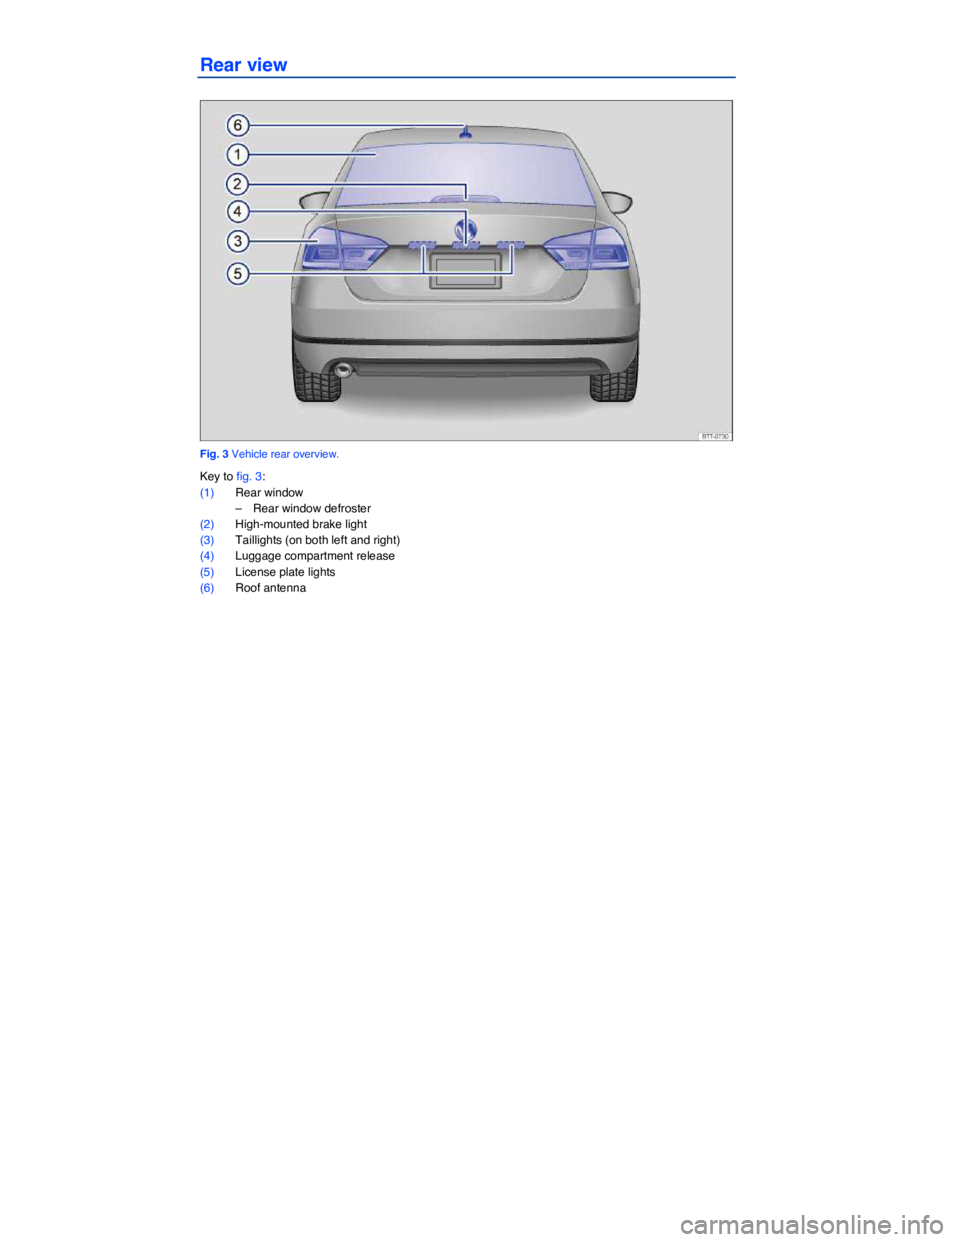 VOLKSWAGEN PASSAT 2012  Owners Manual  
Rear view 
 
Fig. 3 Vehicle rear overview. 
Key to fig. 3: 
(1) Rear window 
–  Rear window defroster  
(2) High-mounted brake light 
(3) Taillights (on both left and right)  
(4) Luggage compartm